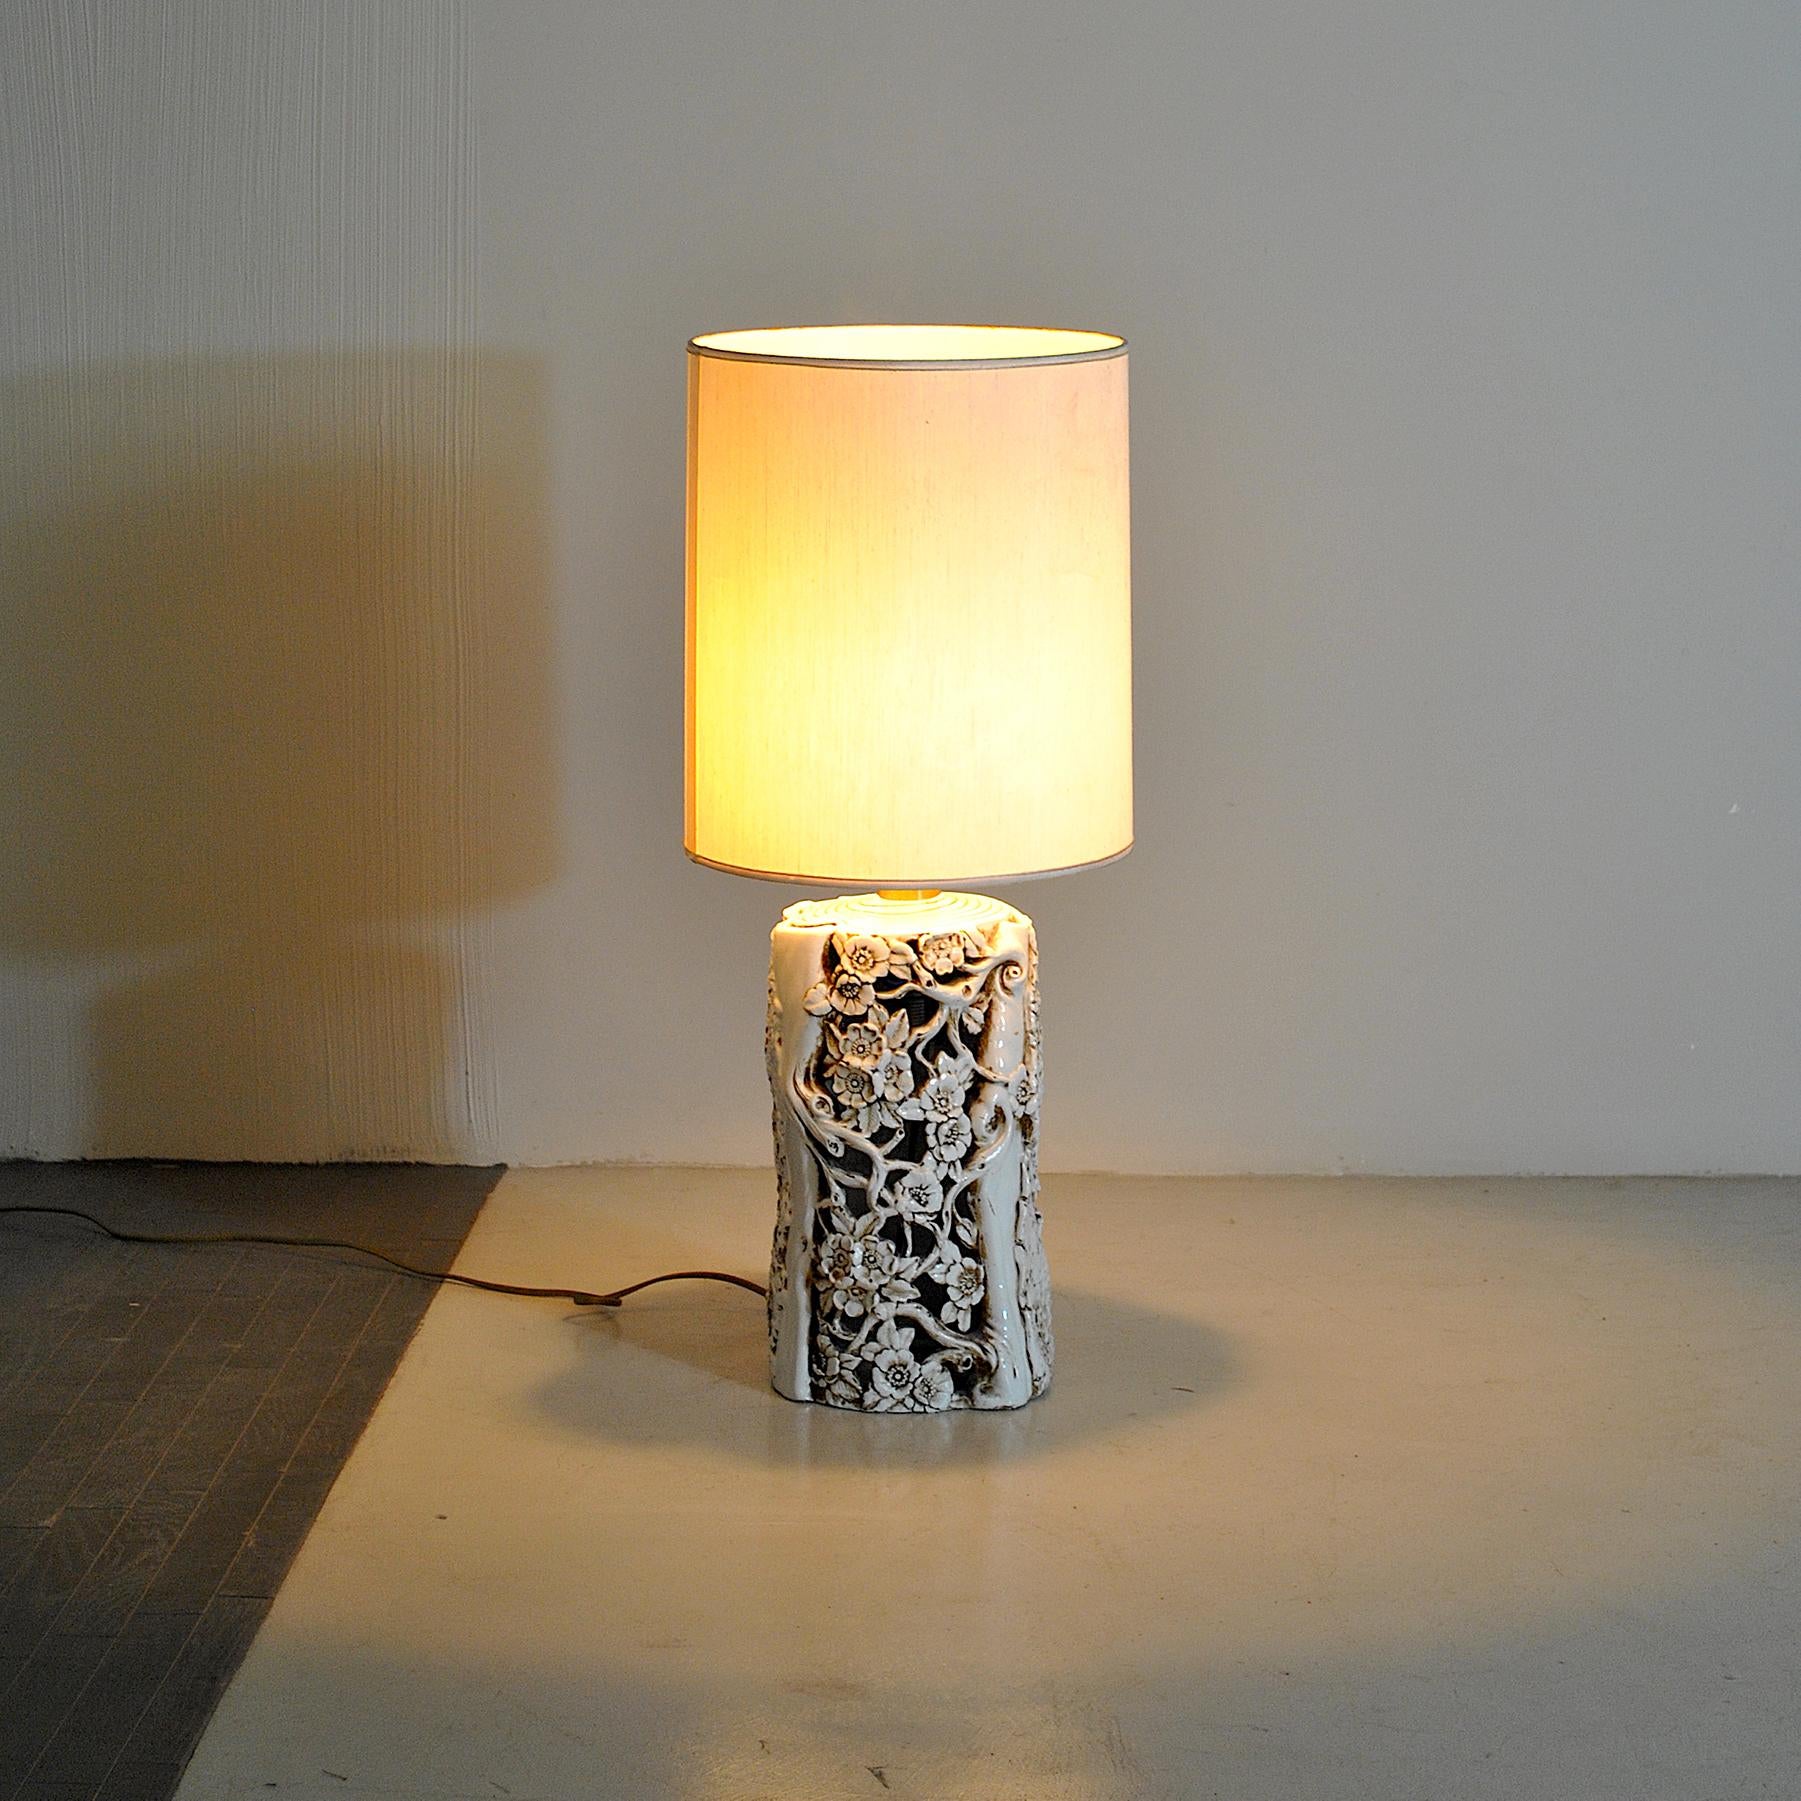 Sculptural table lamp from the 1960s with finely worked glazed ceramic structure.

The lamp is sold without the lampshade in the picture, but it can be requested in the shape, sizes and colors you want with an extra price.

N.b. the measures in